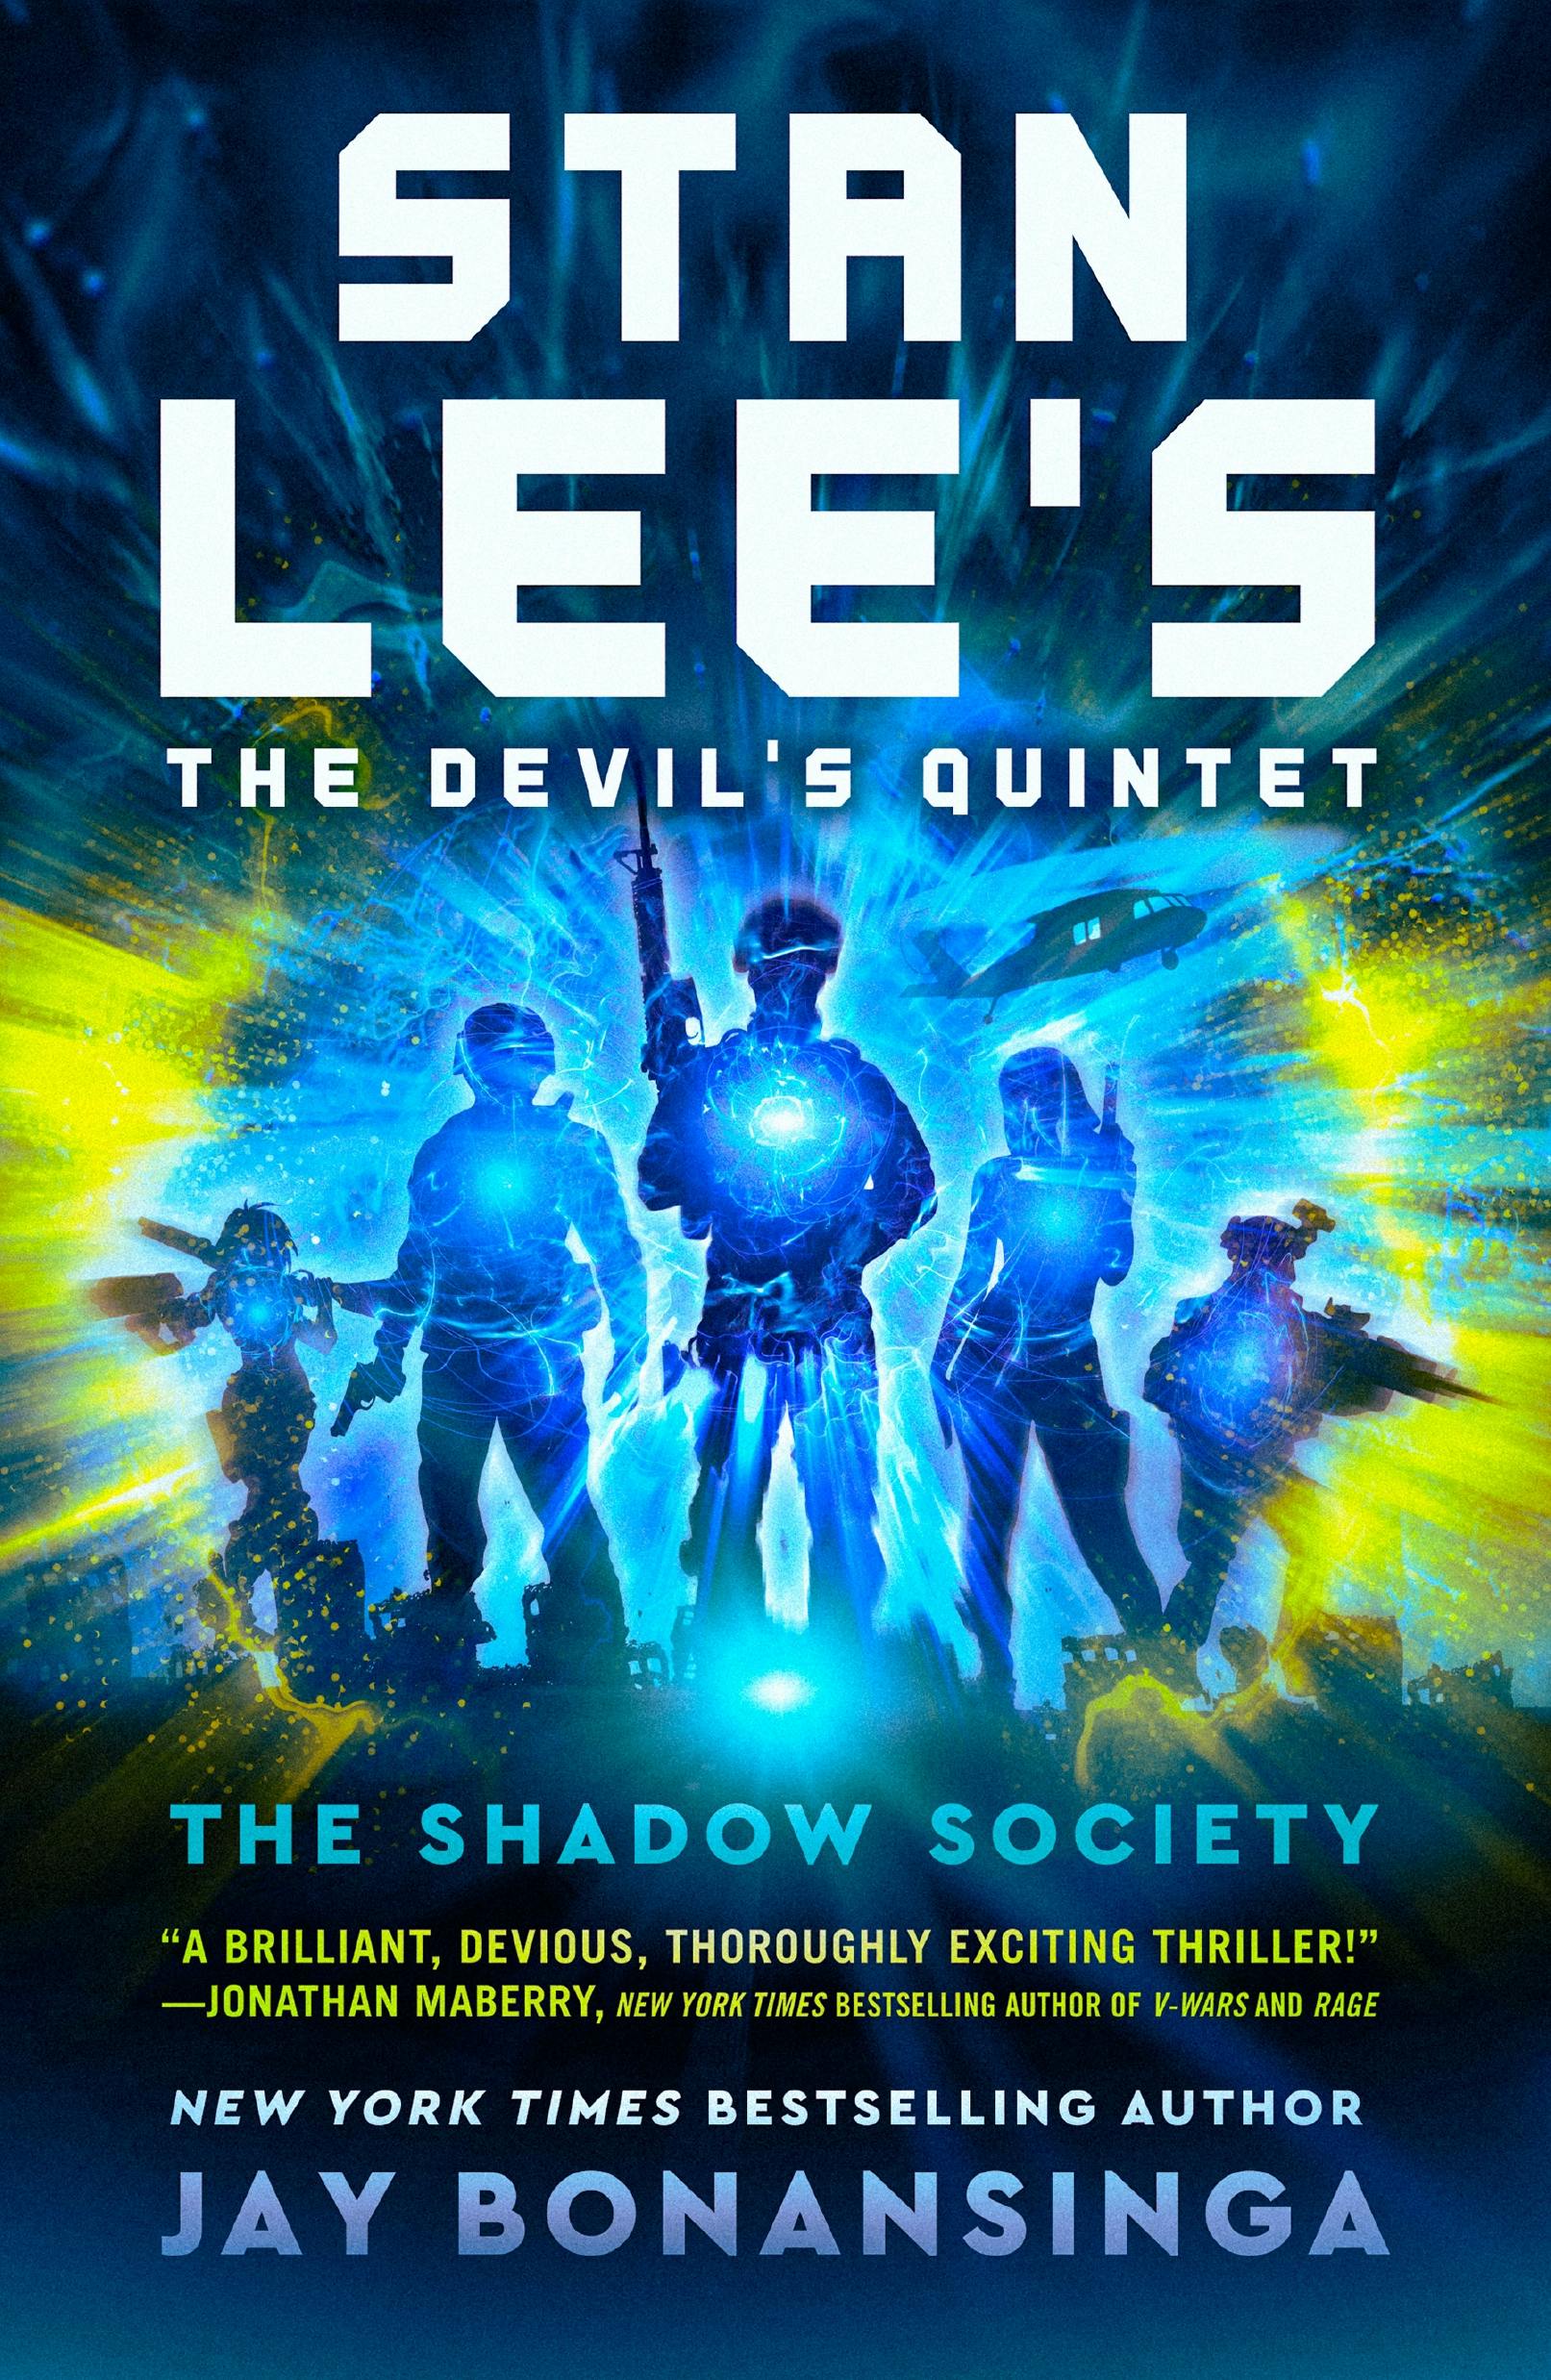 Image of Stan Lee's The Devil's Quintet: The Shadow Society